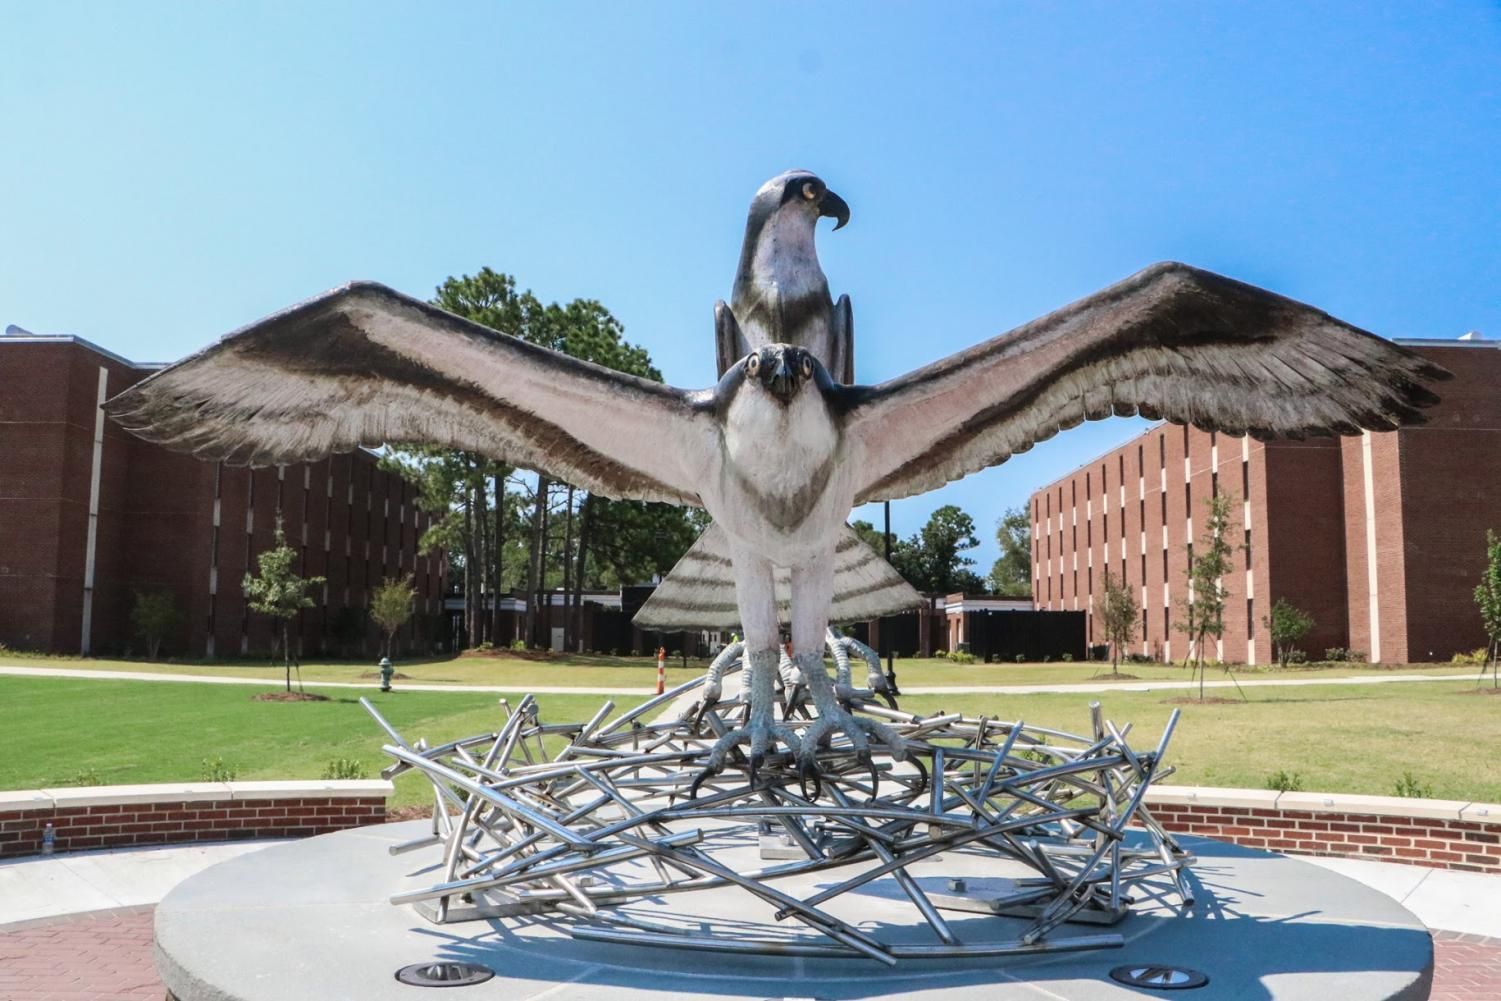 Worlds Largest Seahawk Sculpture, world record in Wilmington, North Carolina